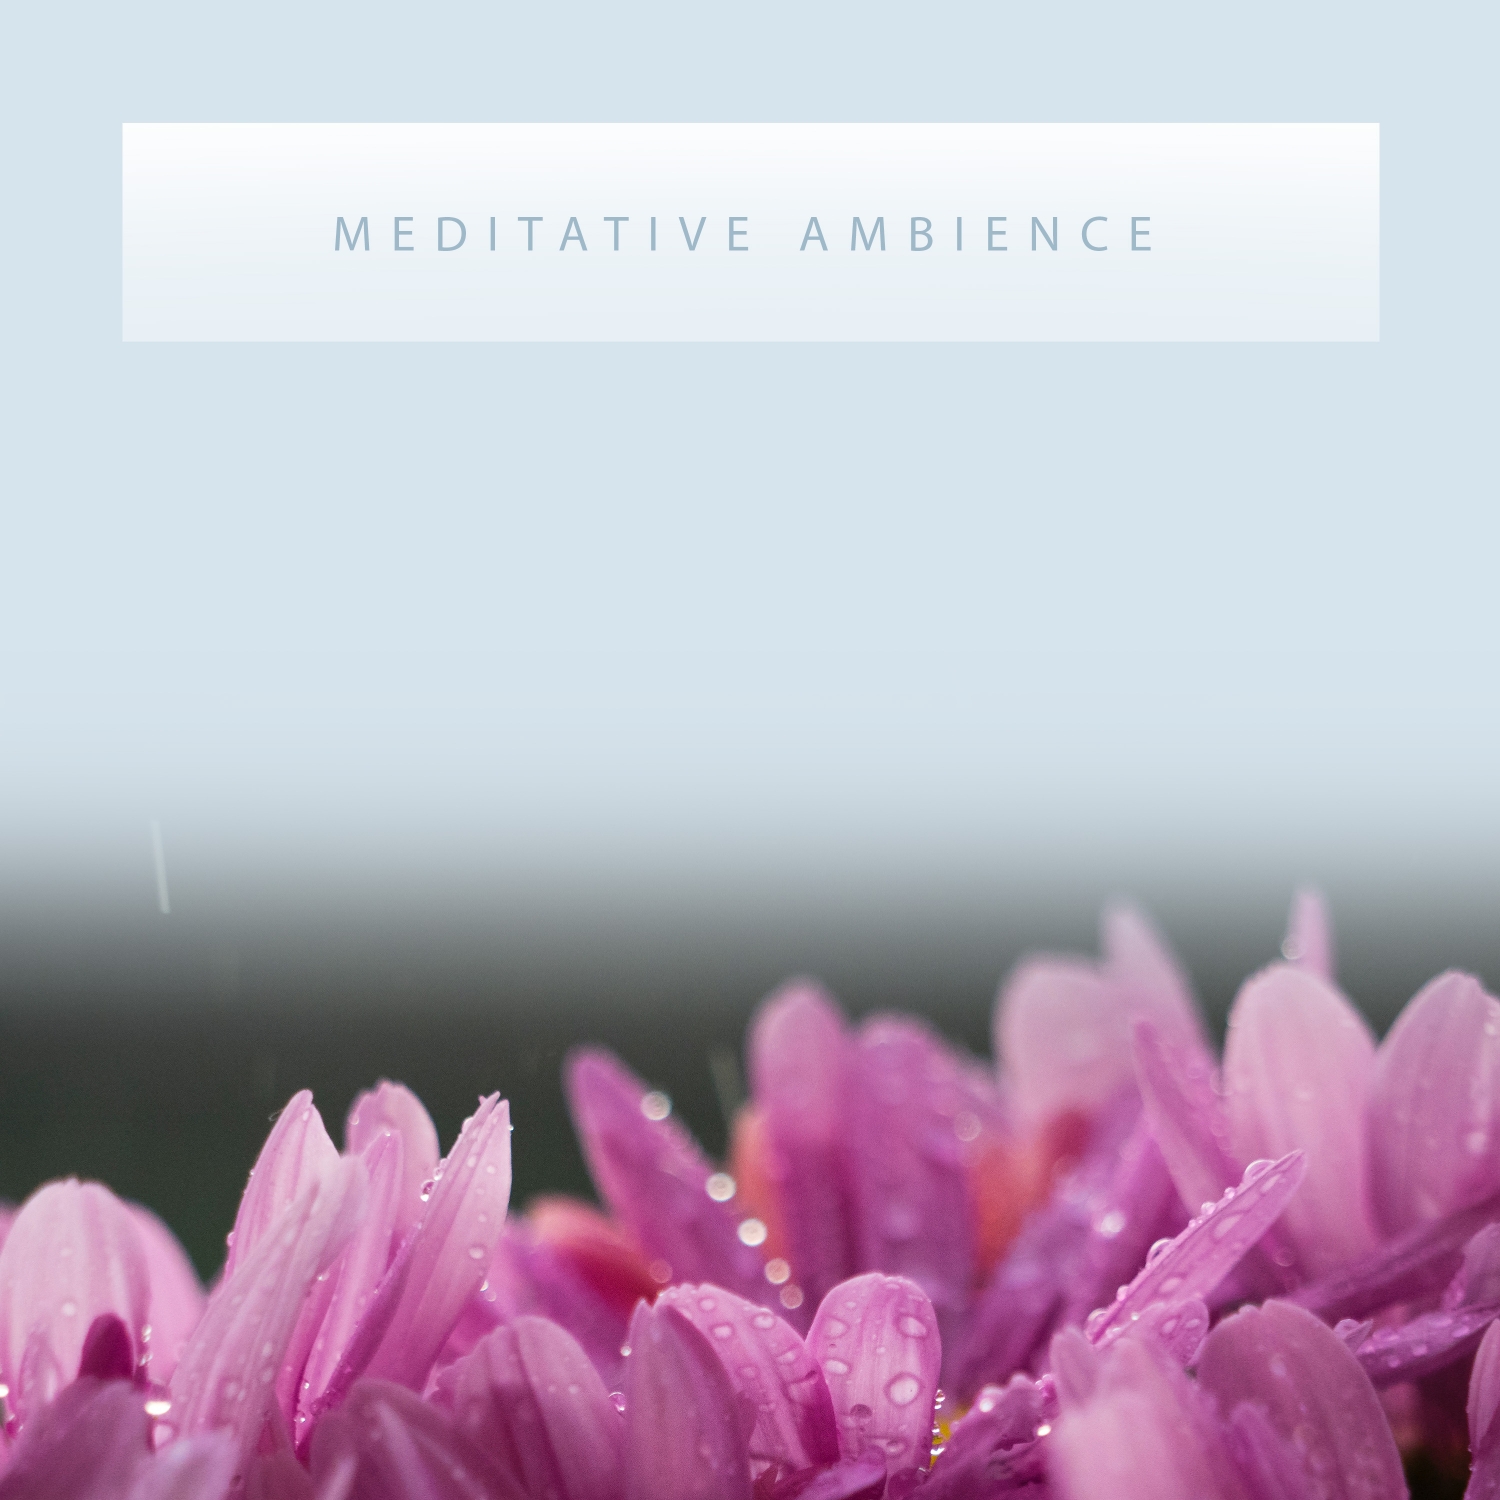 13 Tracks of Meditative Ambience - Nature's Miracle Cure